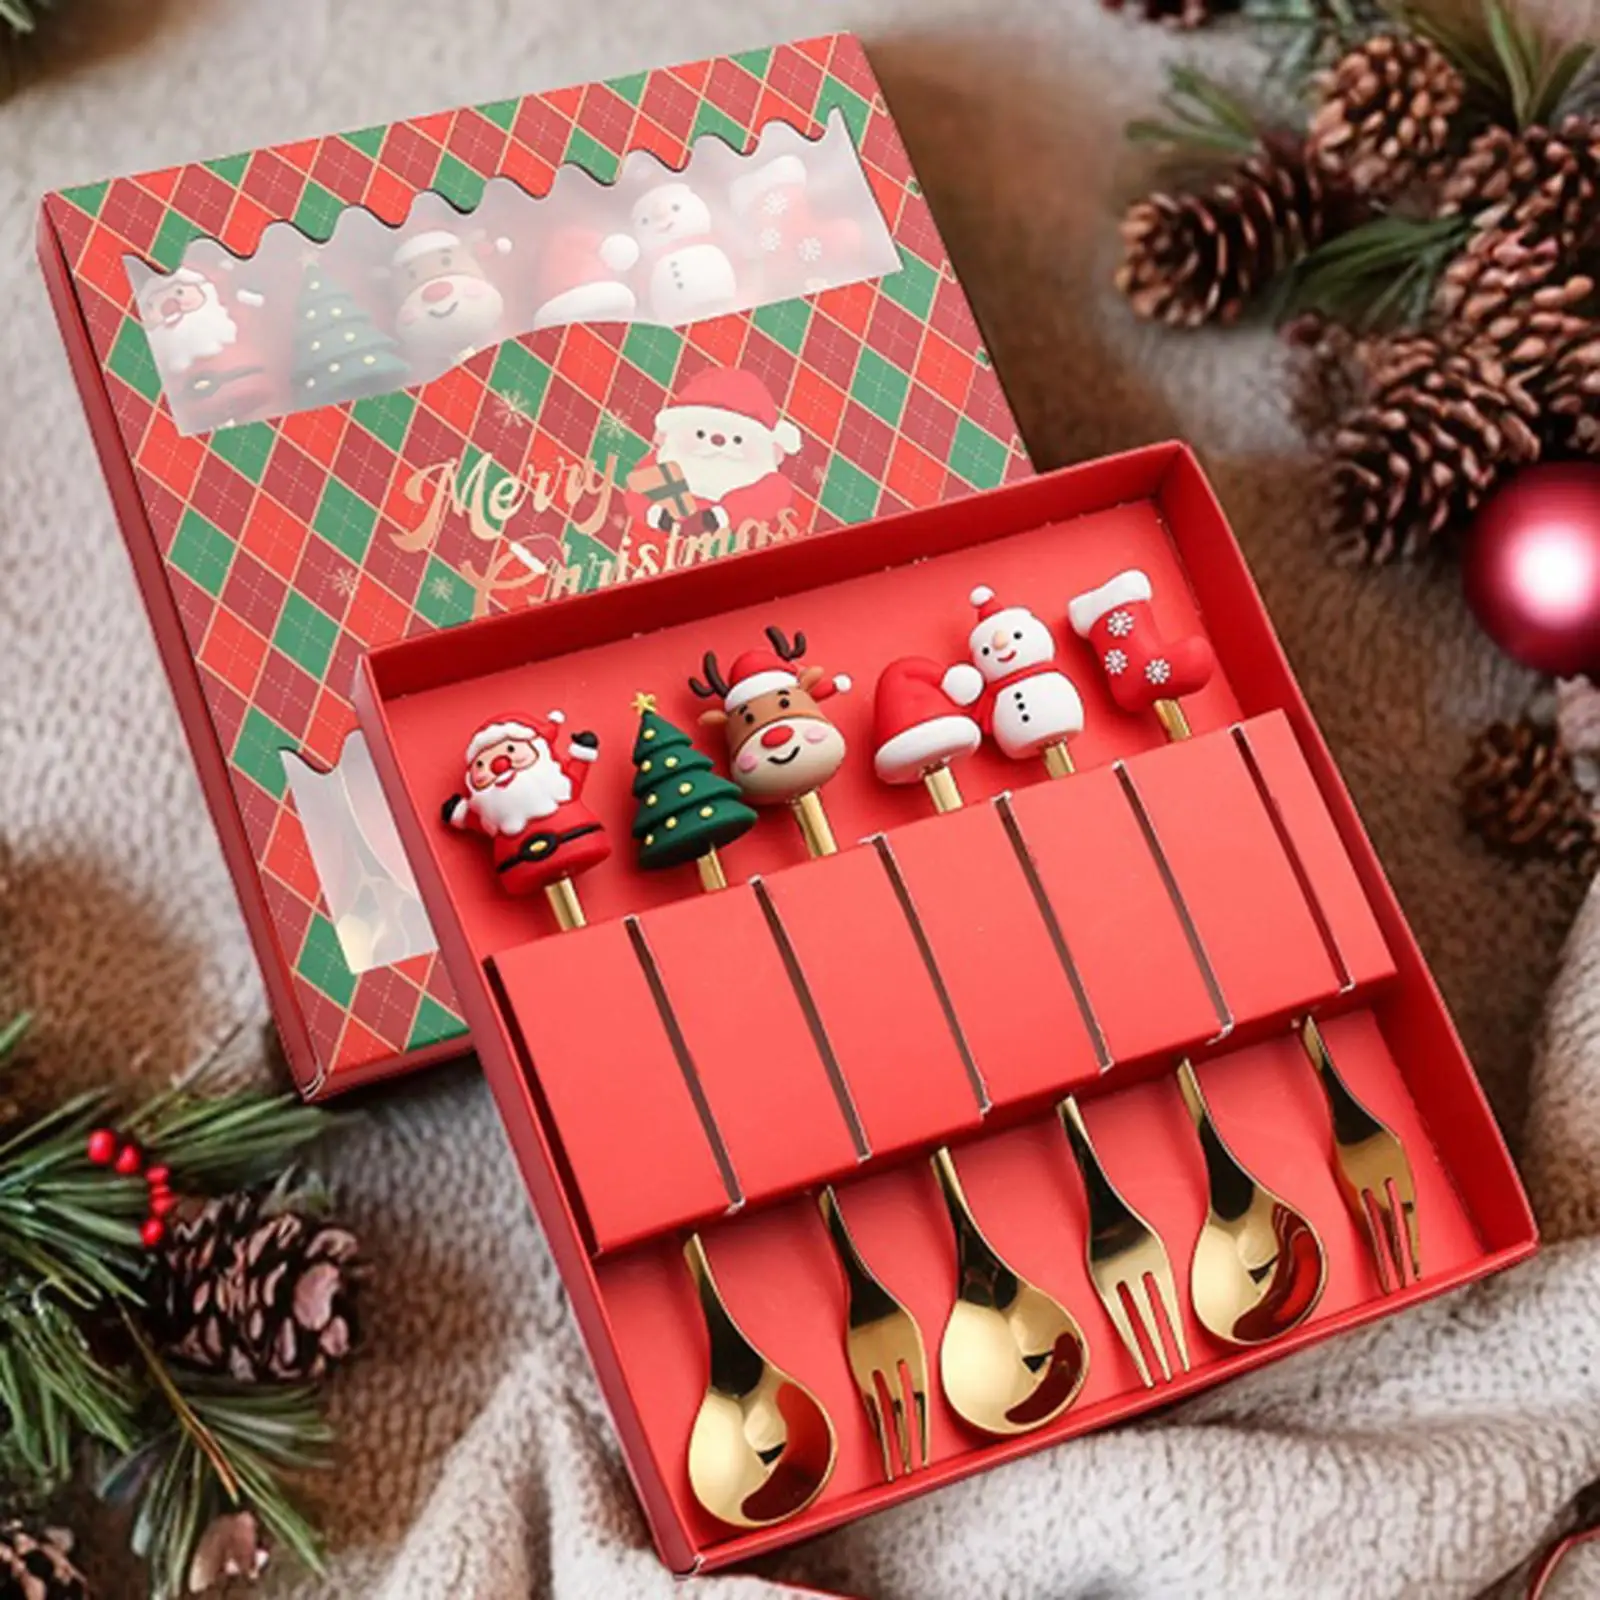 6 Pieces Christmas Spoons Forks Set Stainless Steel with Gift Box Flatware Cutlery Set for Daily Use Xmas Dessert